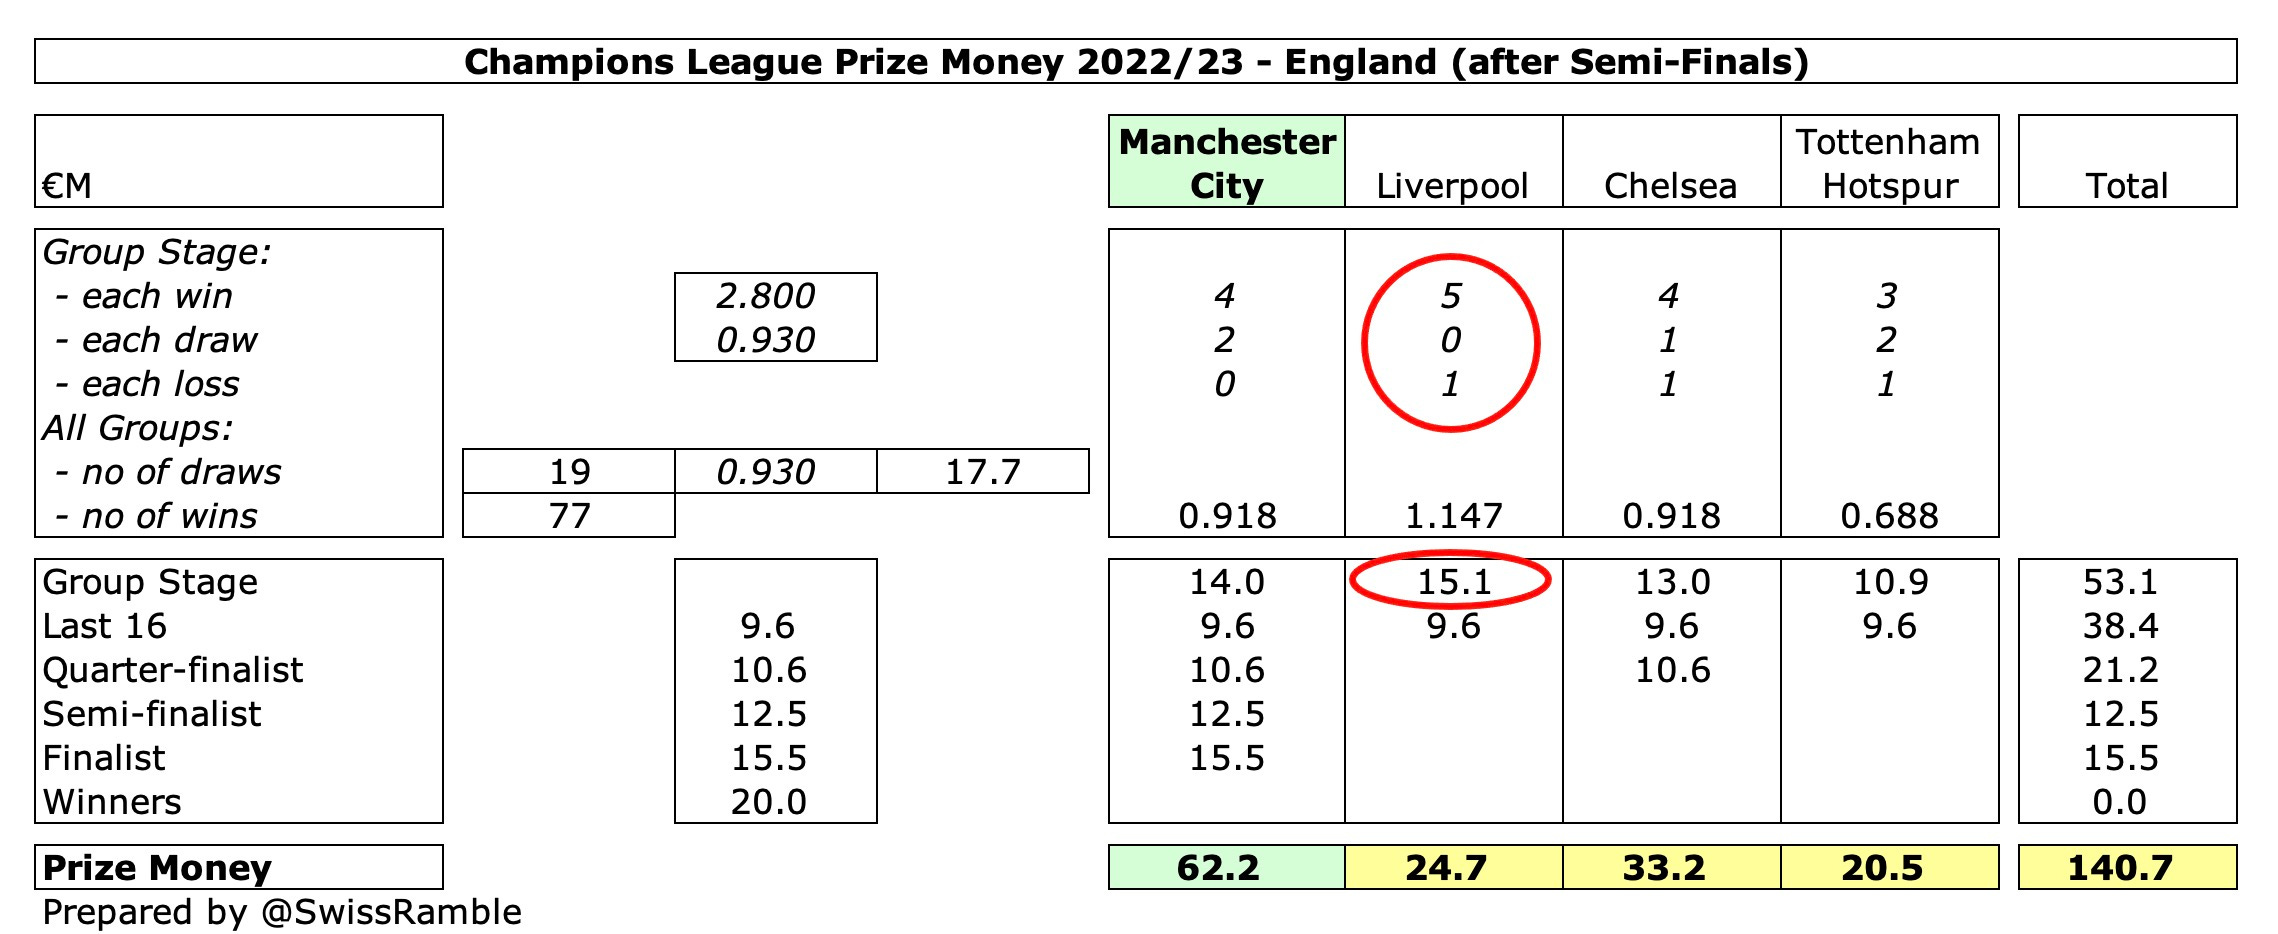 Where the money went: Premier League prize and TV payments for